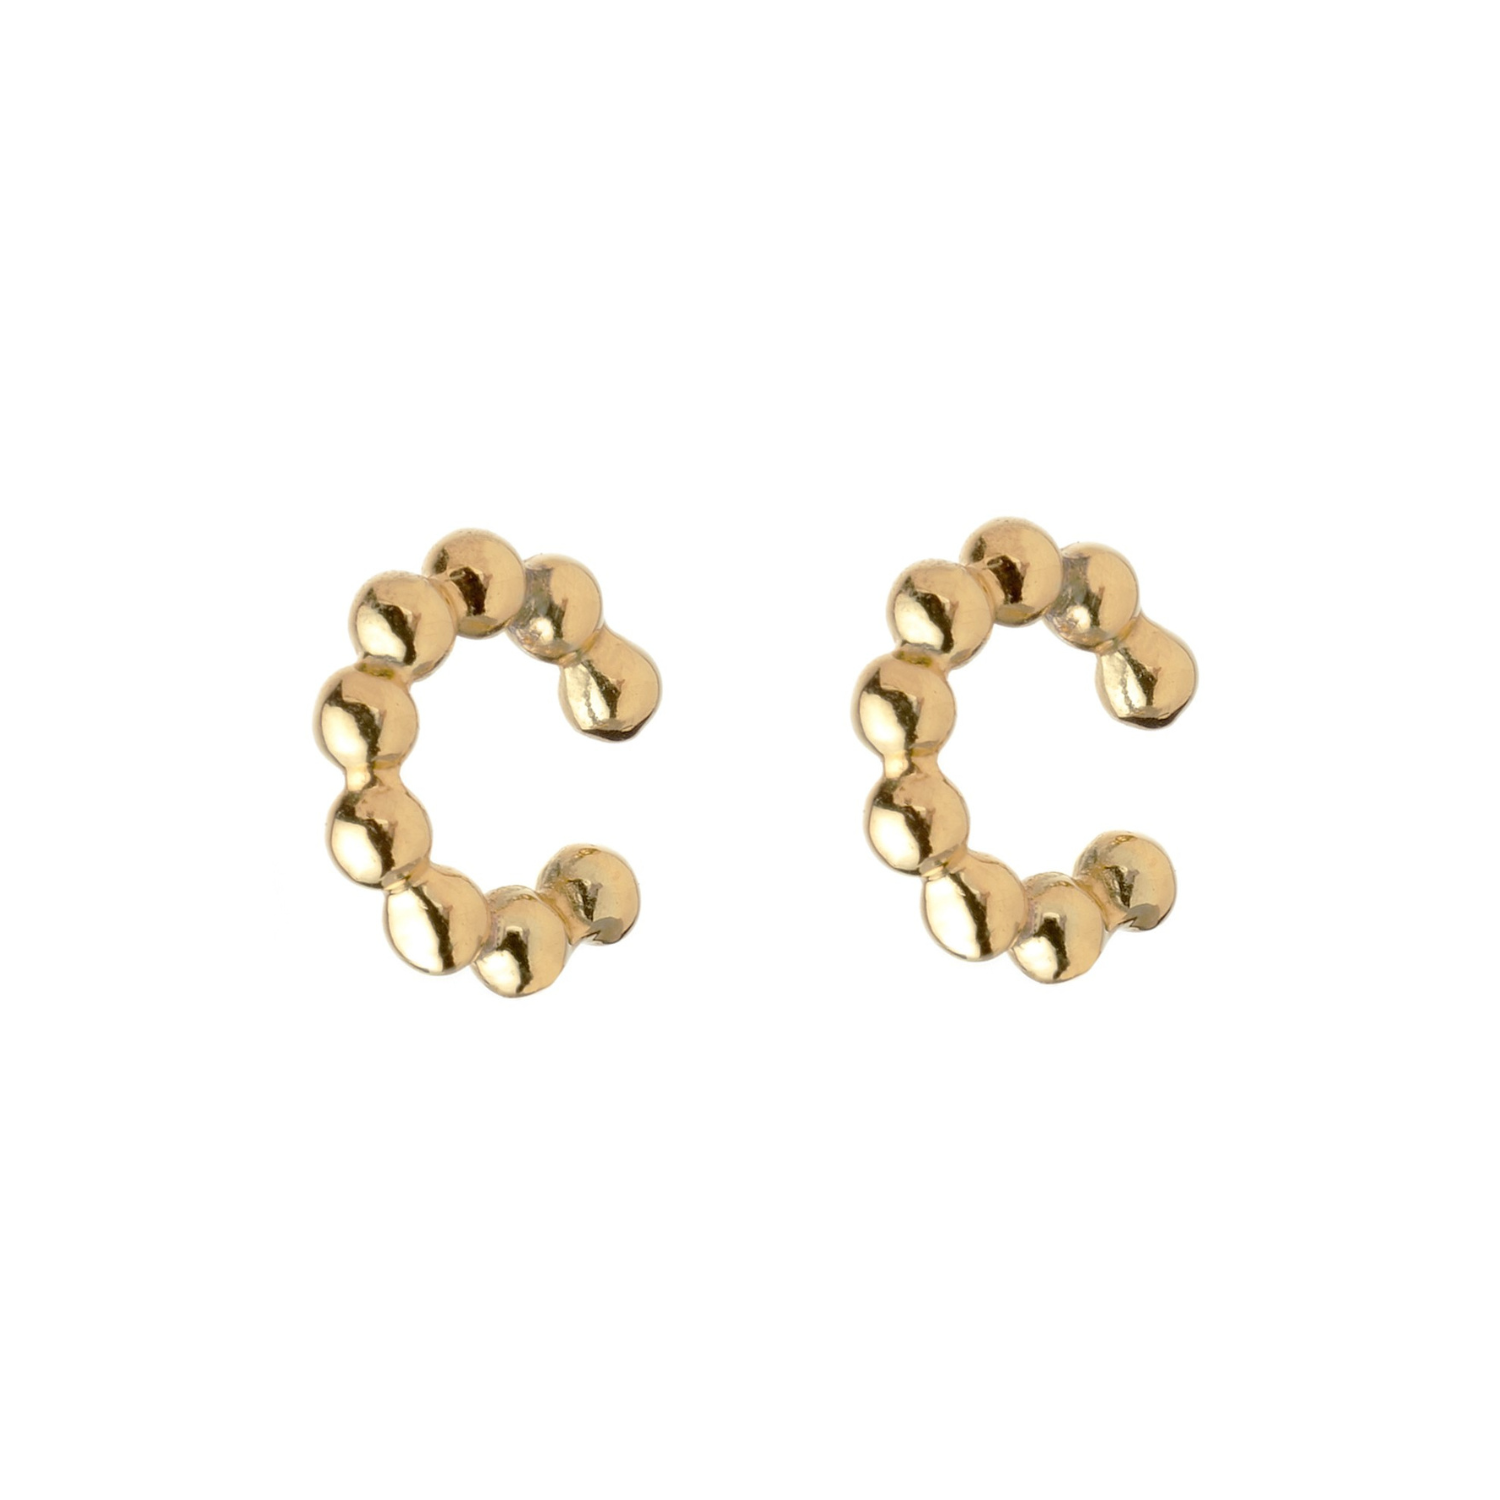 Artisan-crafted small ear cuffs showcasing a distinctive and contemporary aesthetic.